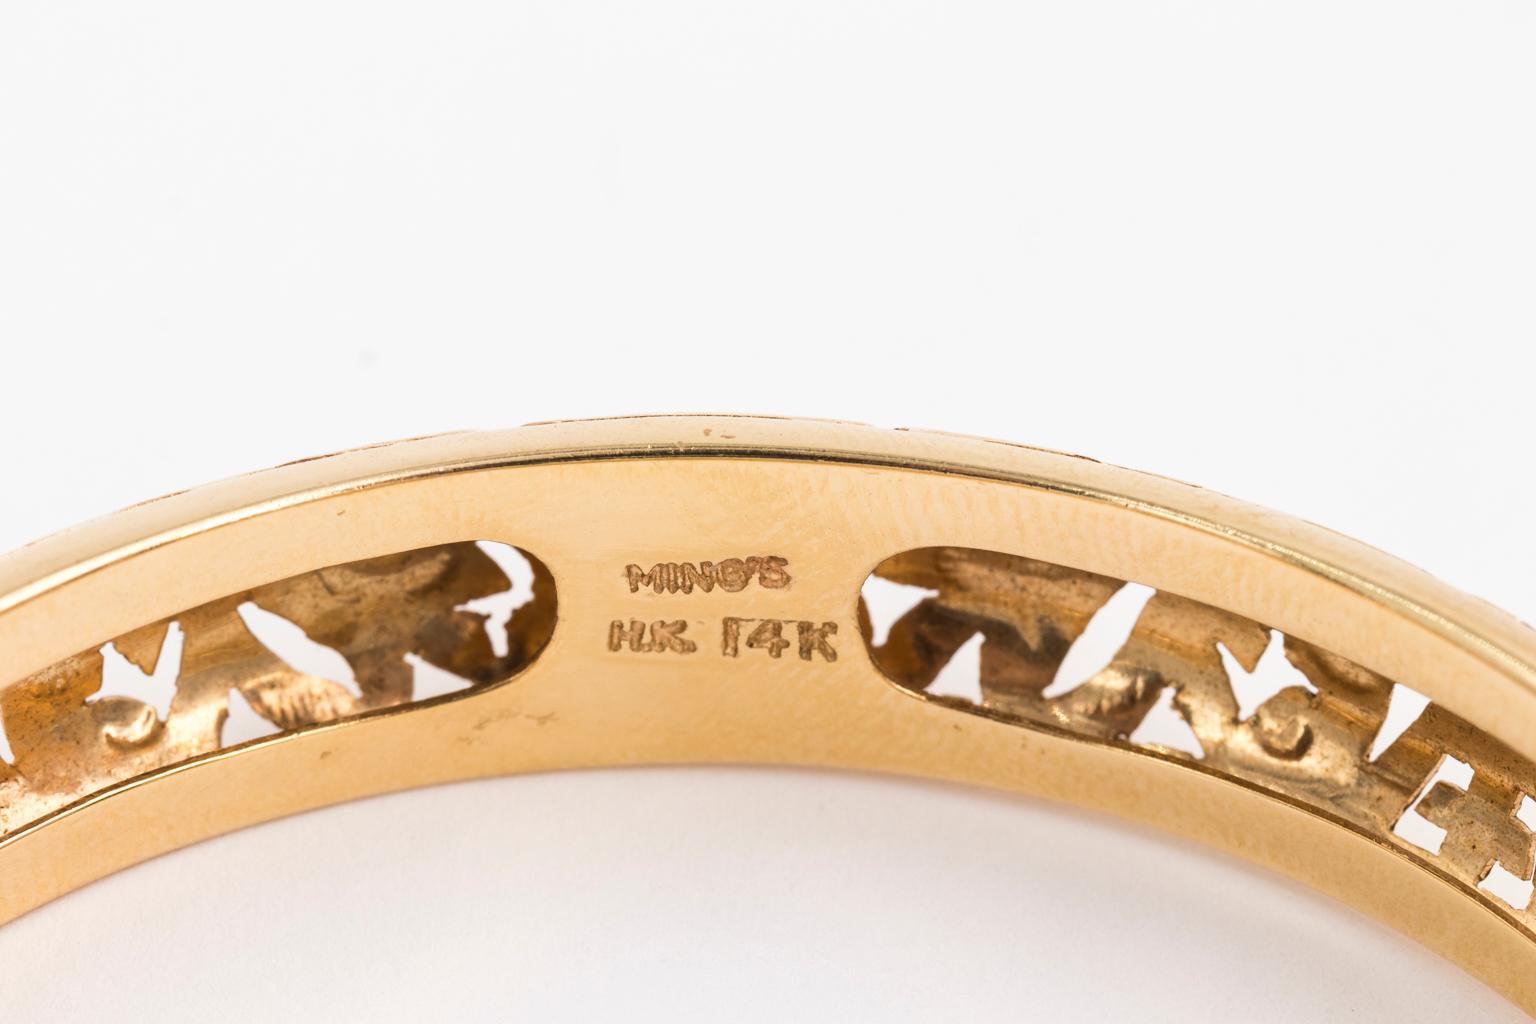 14K yellow gold bracelet made by Ming's of Honolulu. It has the signature Leaf Scroll and Longevity pierced gold work and is signed Ming's H.K. 14k. Inside diameter of the bracelet is 2 3/8 inches. 12 mm tall and 5 mm thick - with a nice 3-D